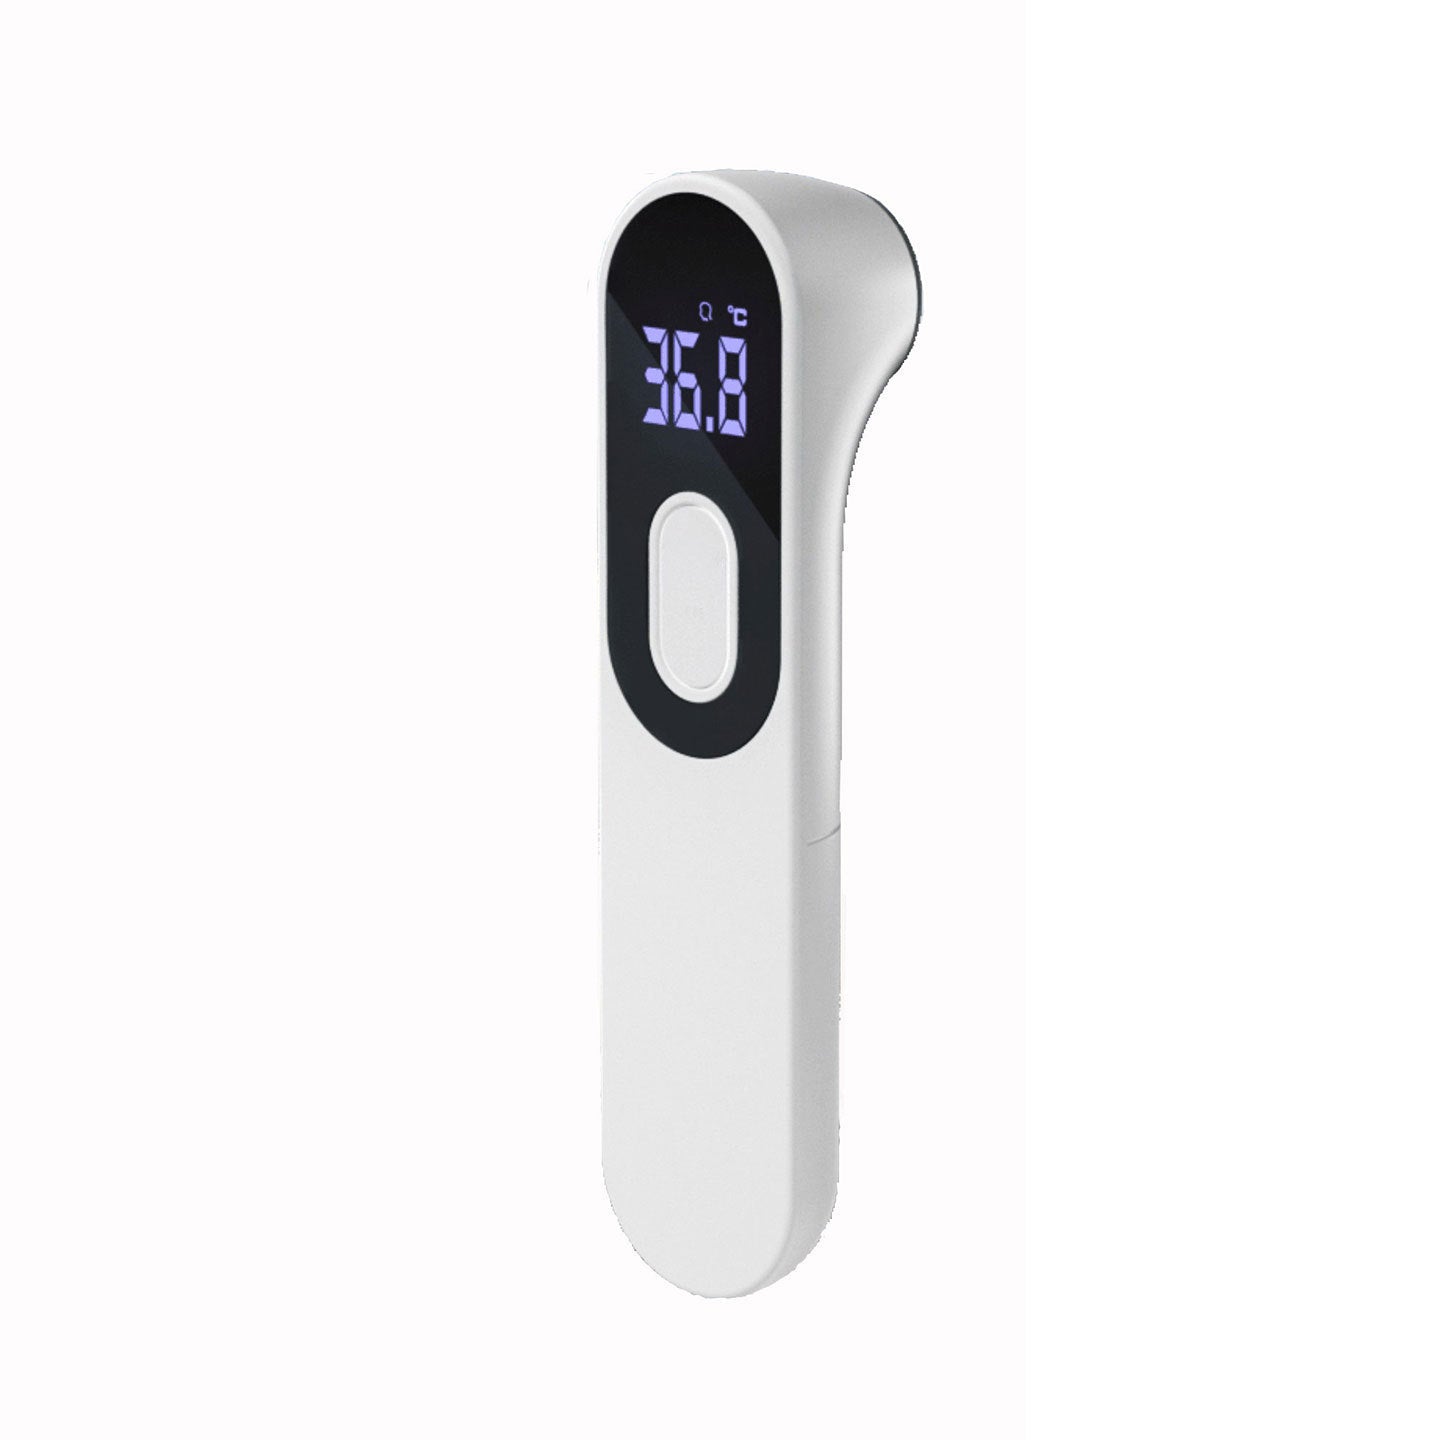 Home Infrared Thermometer - Household Thermometers -  Trend Goods